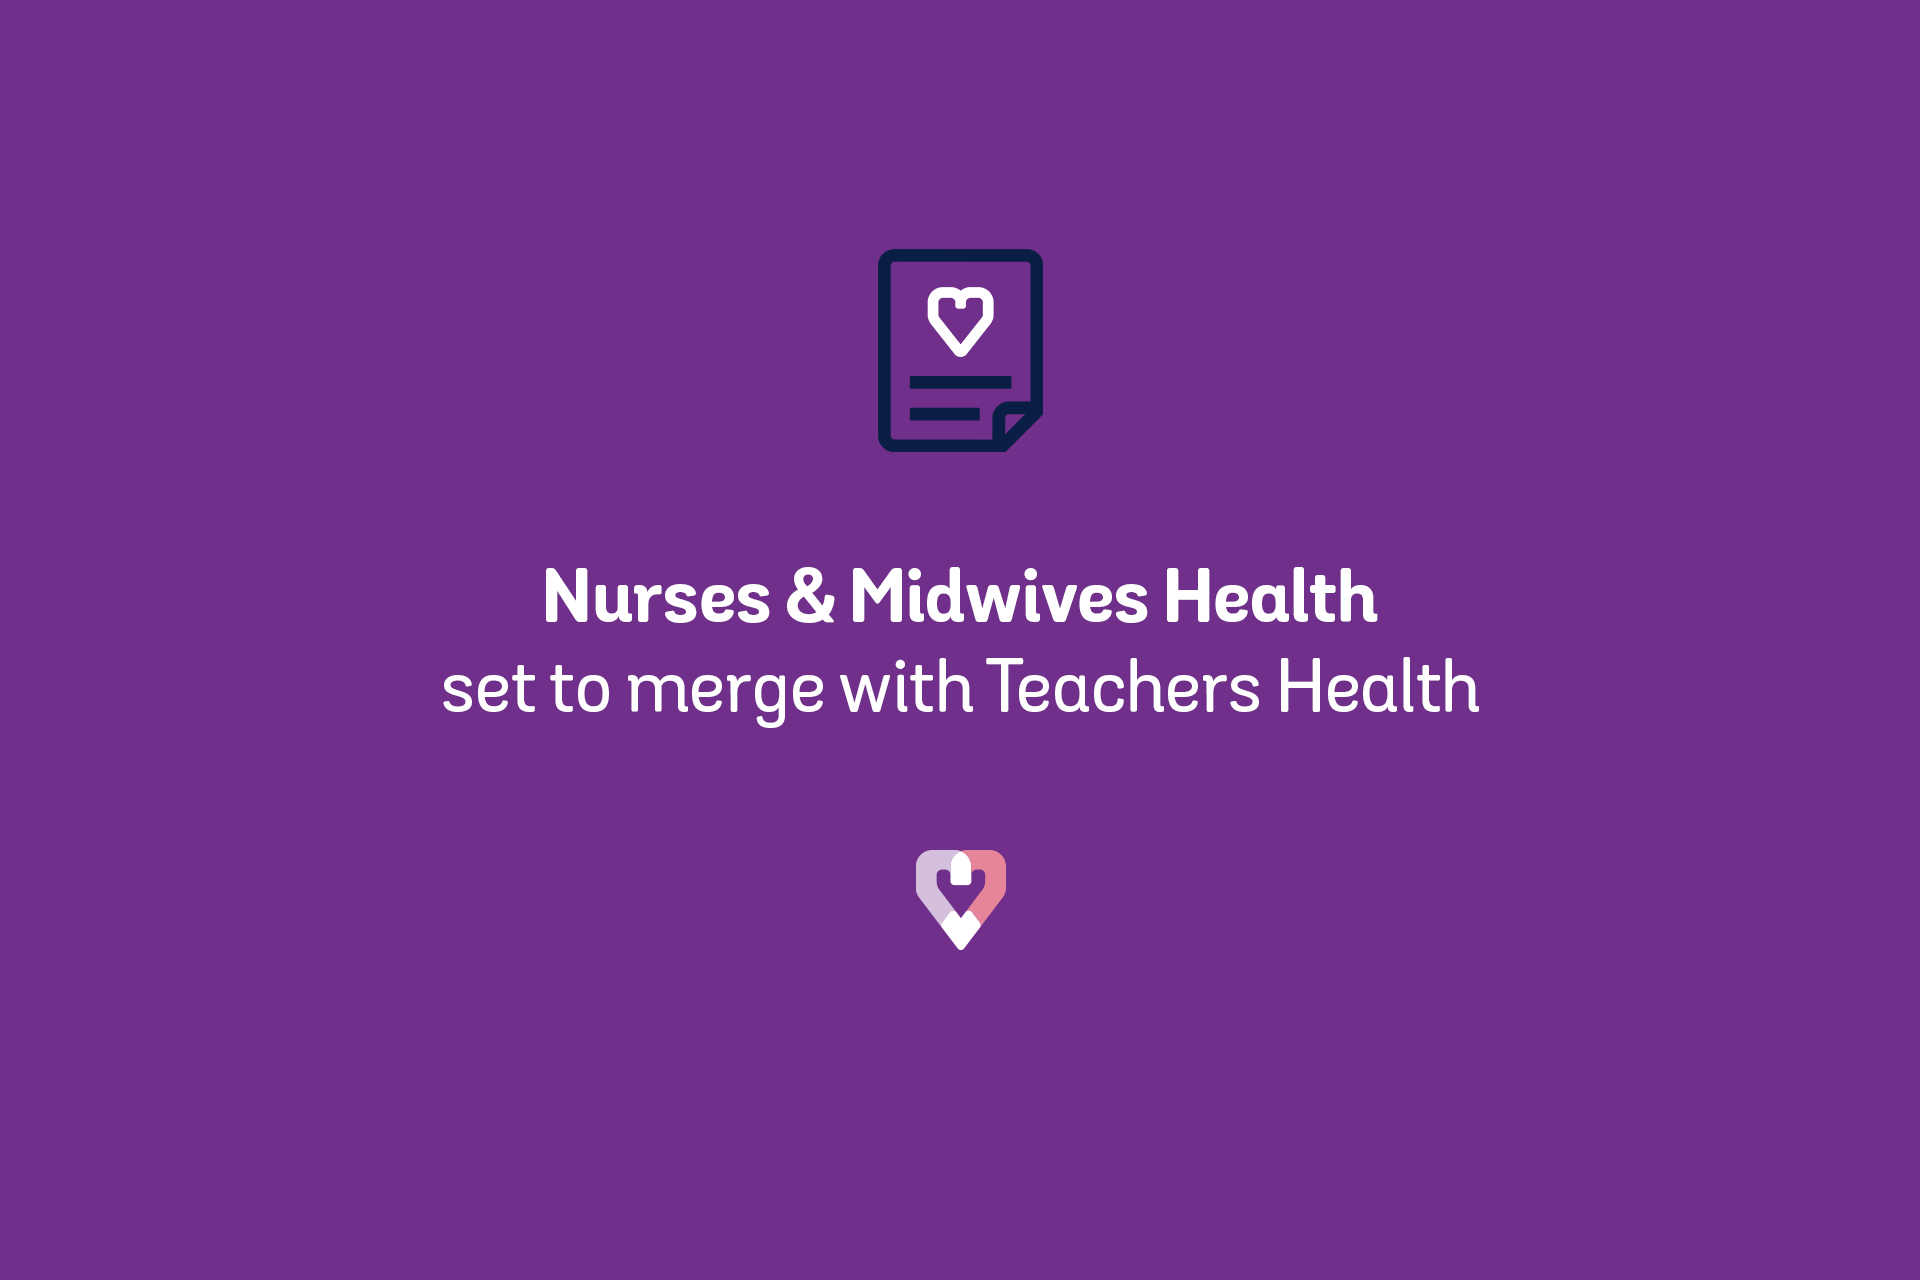 Building a stronger future for Nurses & Midwives Health - Lamp Online